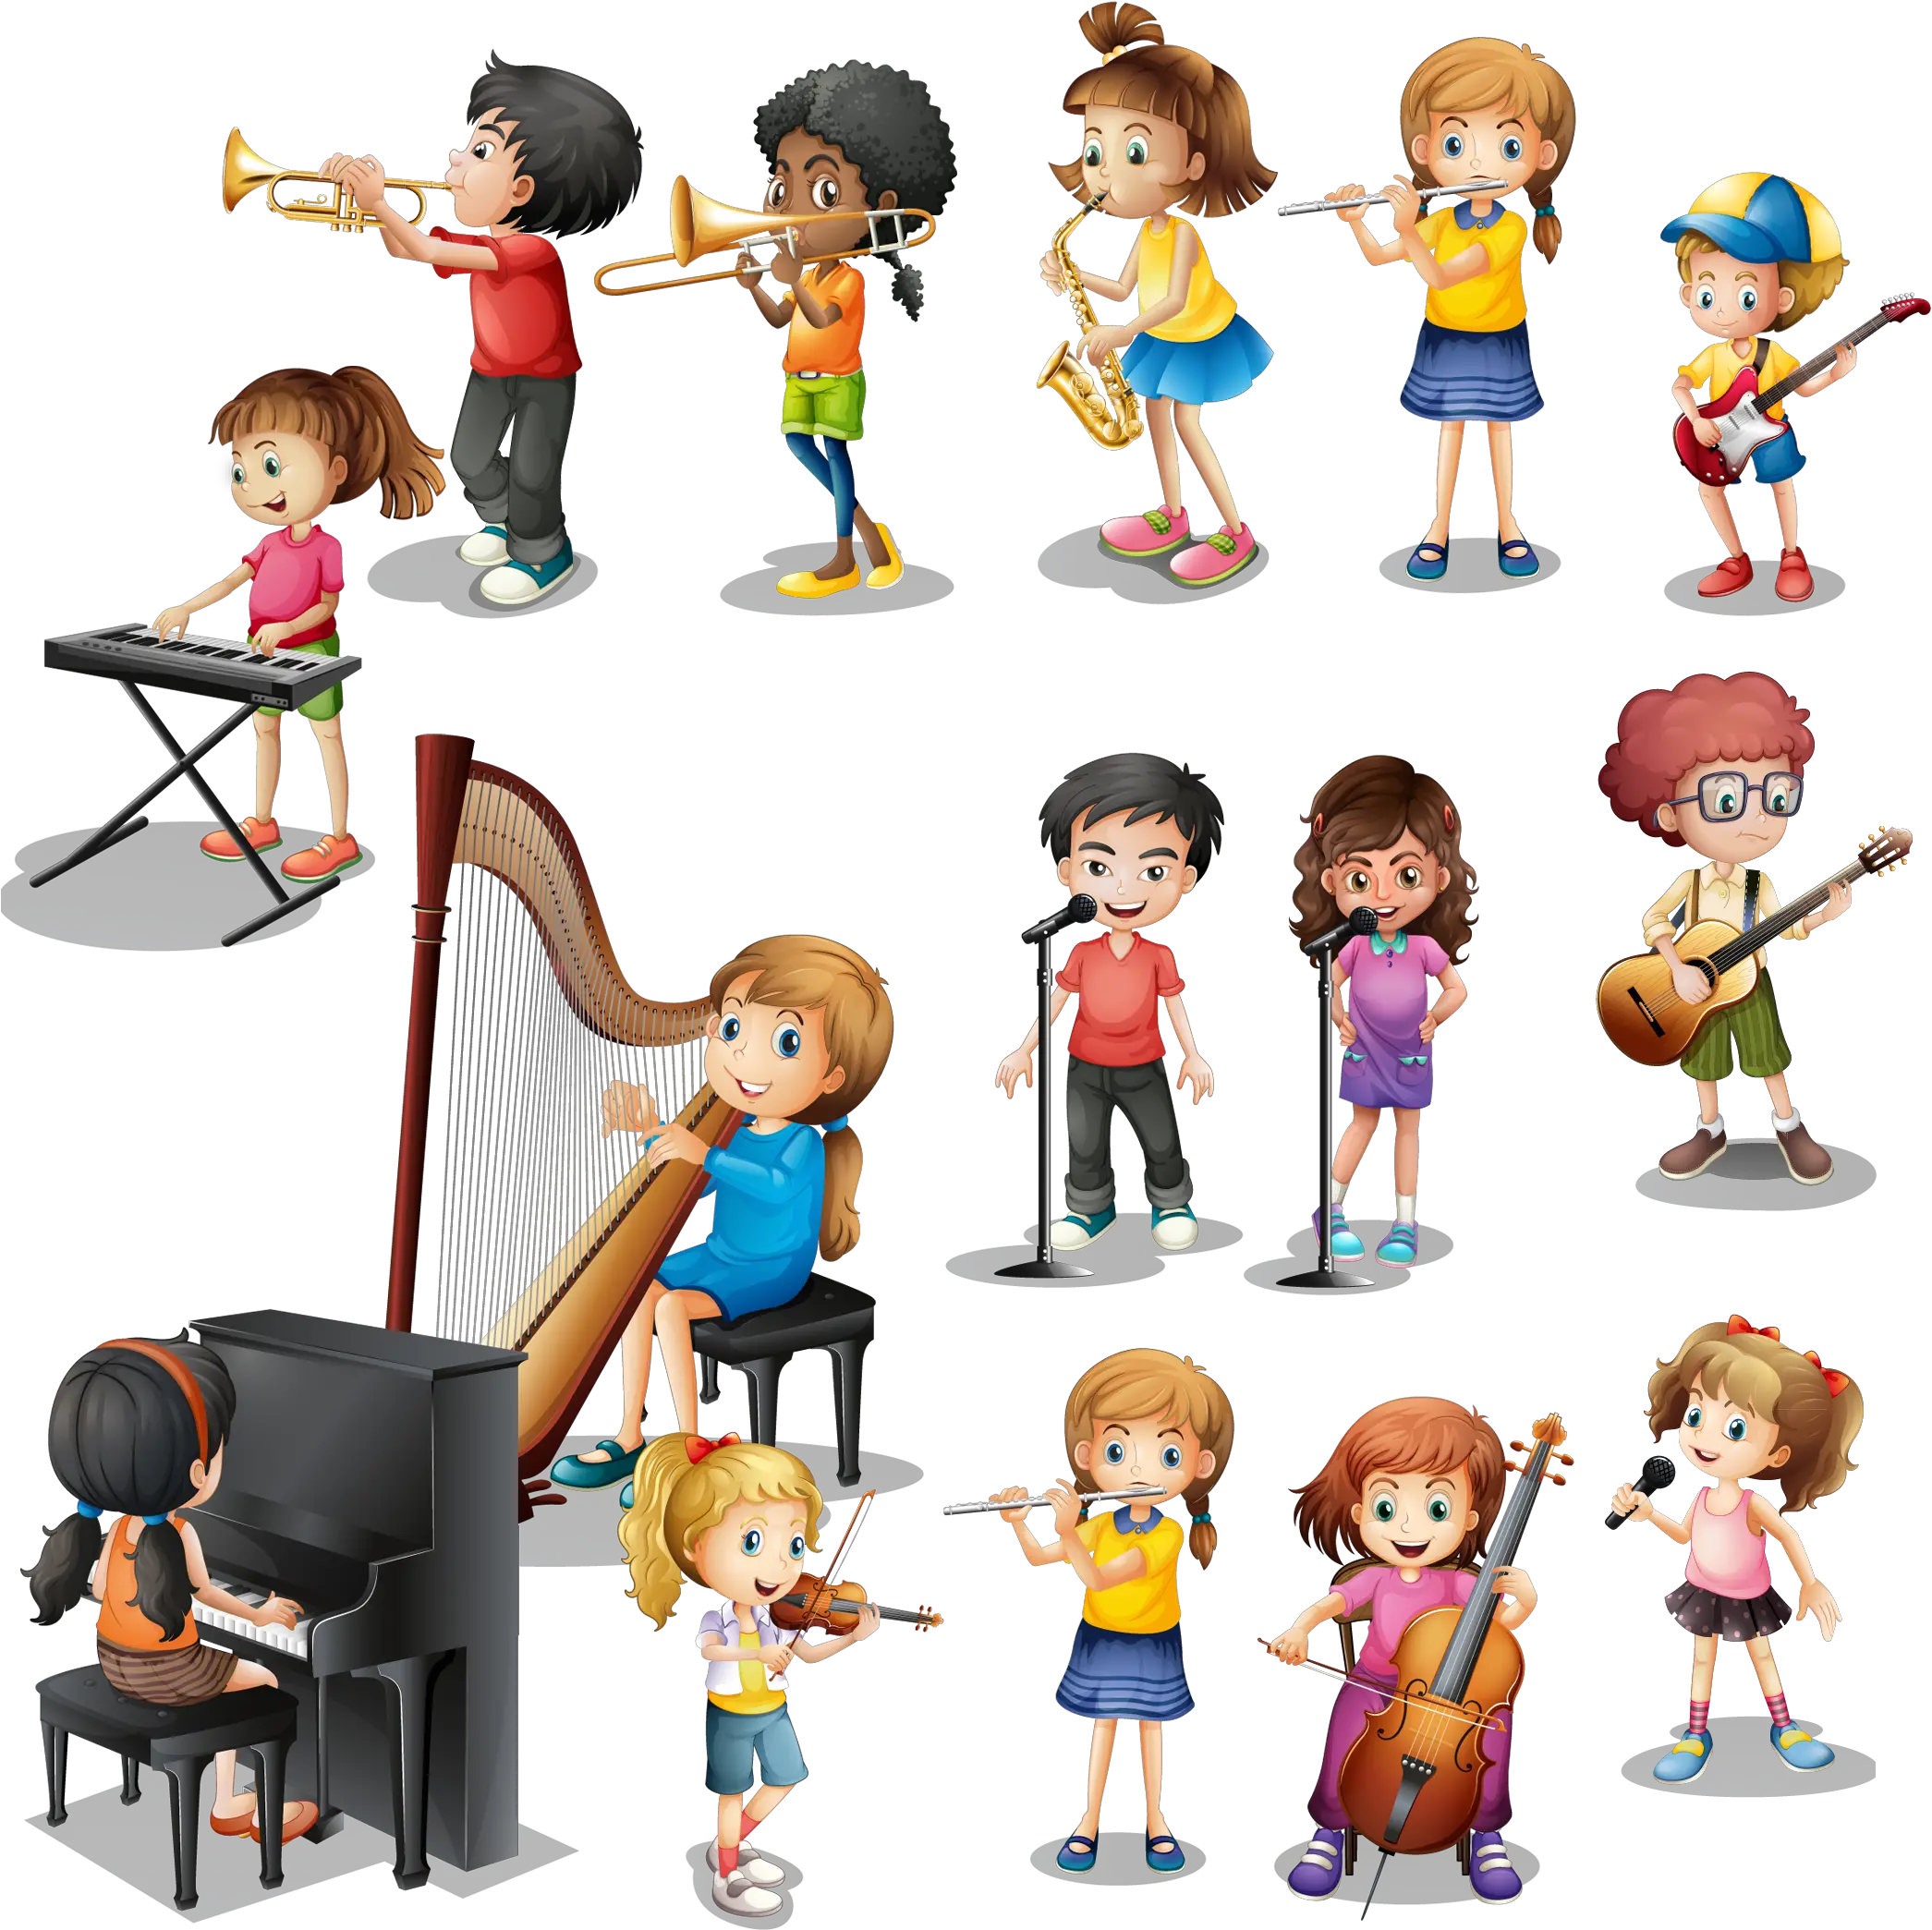 Download Musical Instrument Play Child Kids Play Imagenes De Niños Tocando Instrumentos Musicales Png Kids Playing Png